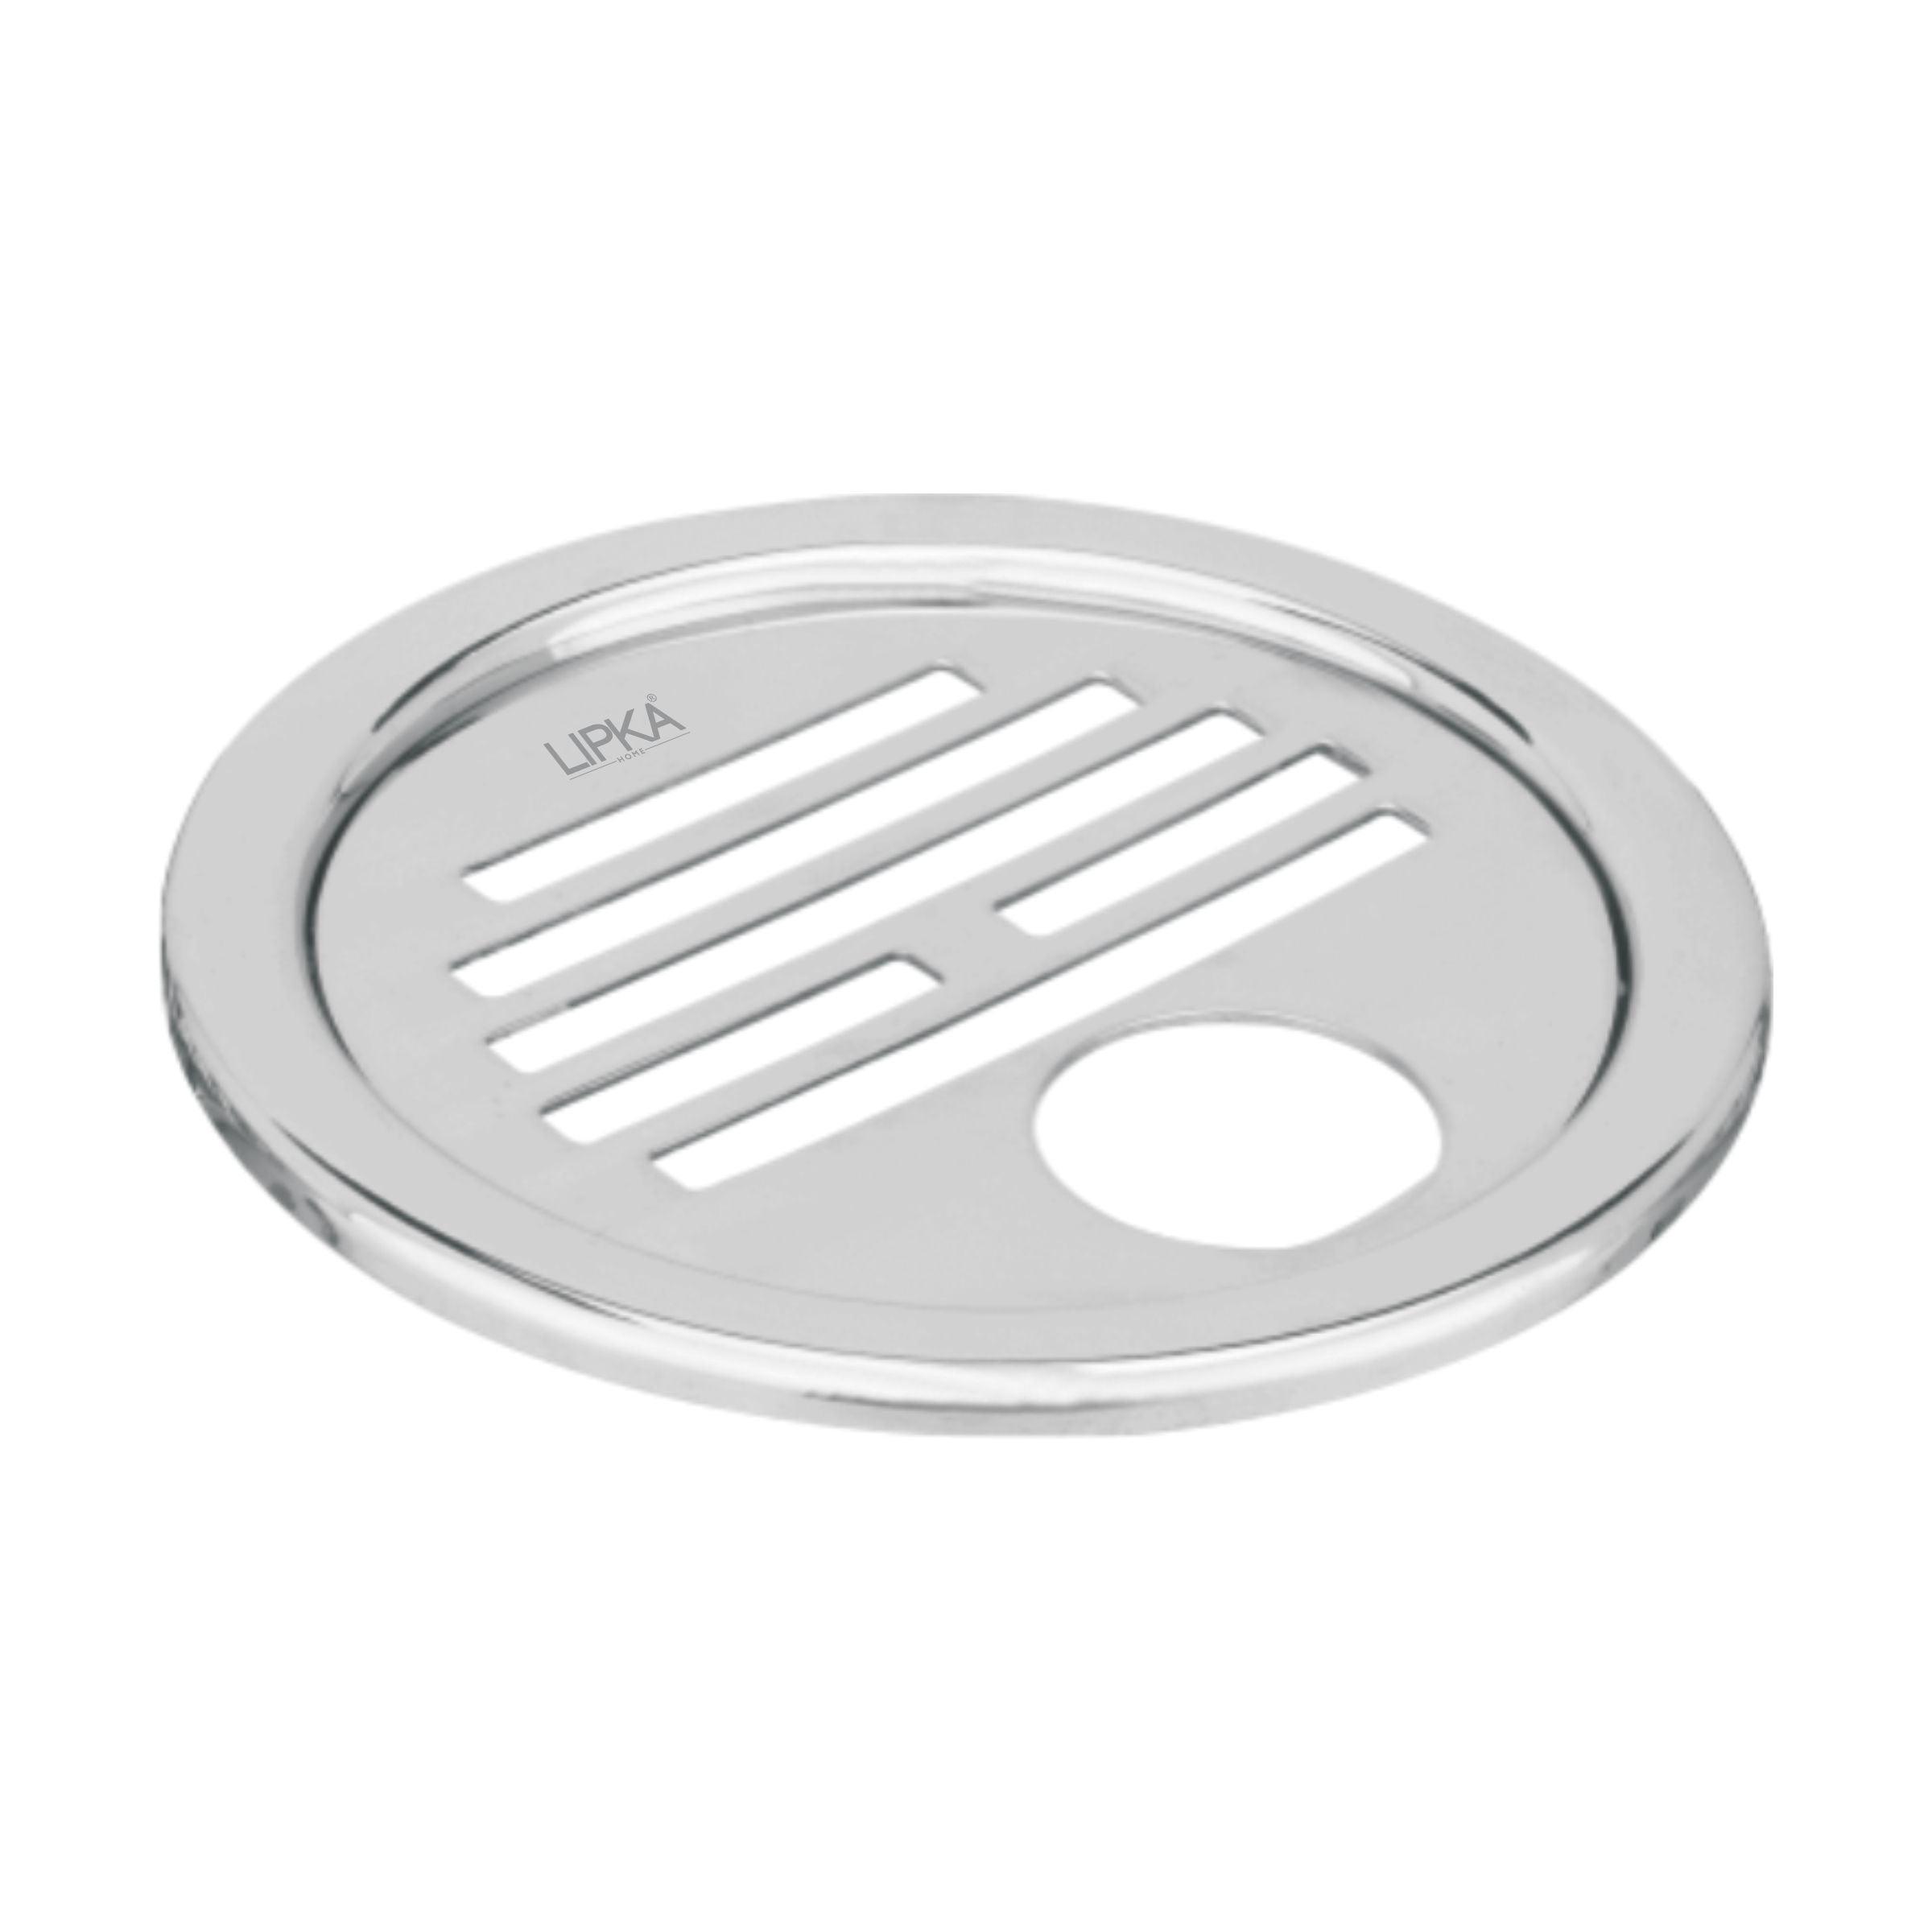 Eon Round Floor Drain with Golden Classic Jali & Hole (5 inches)